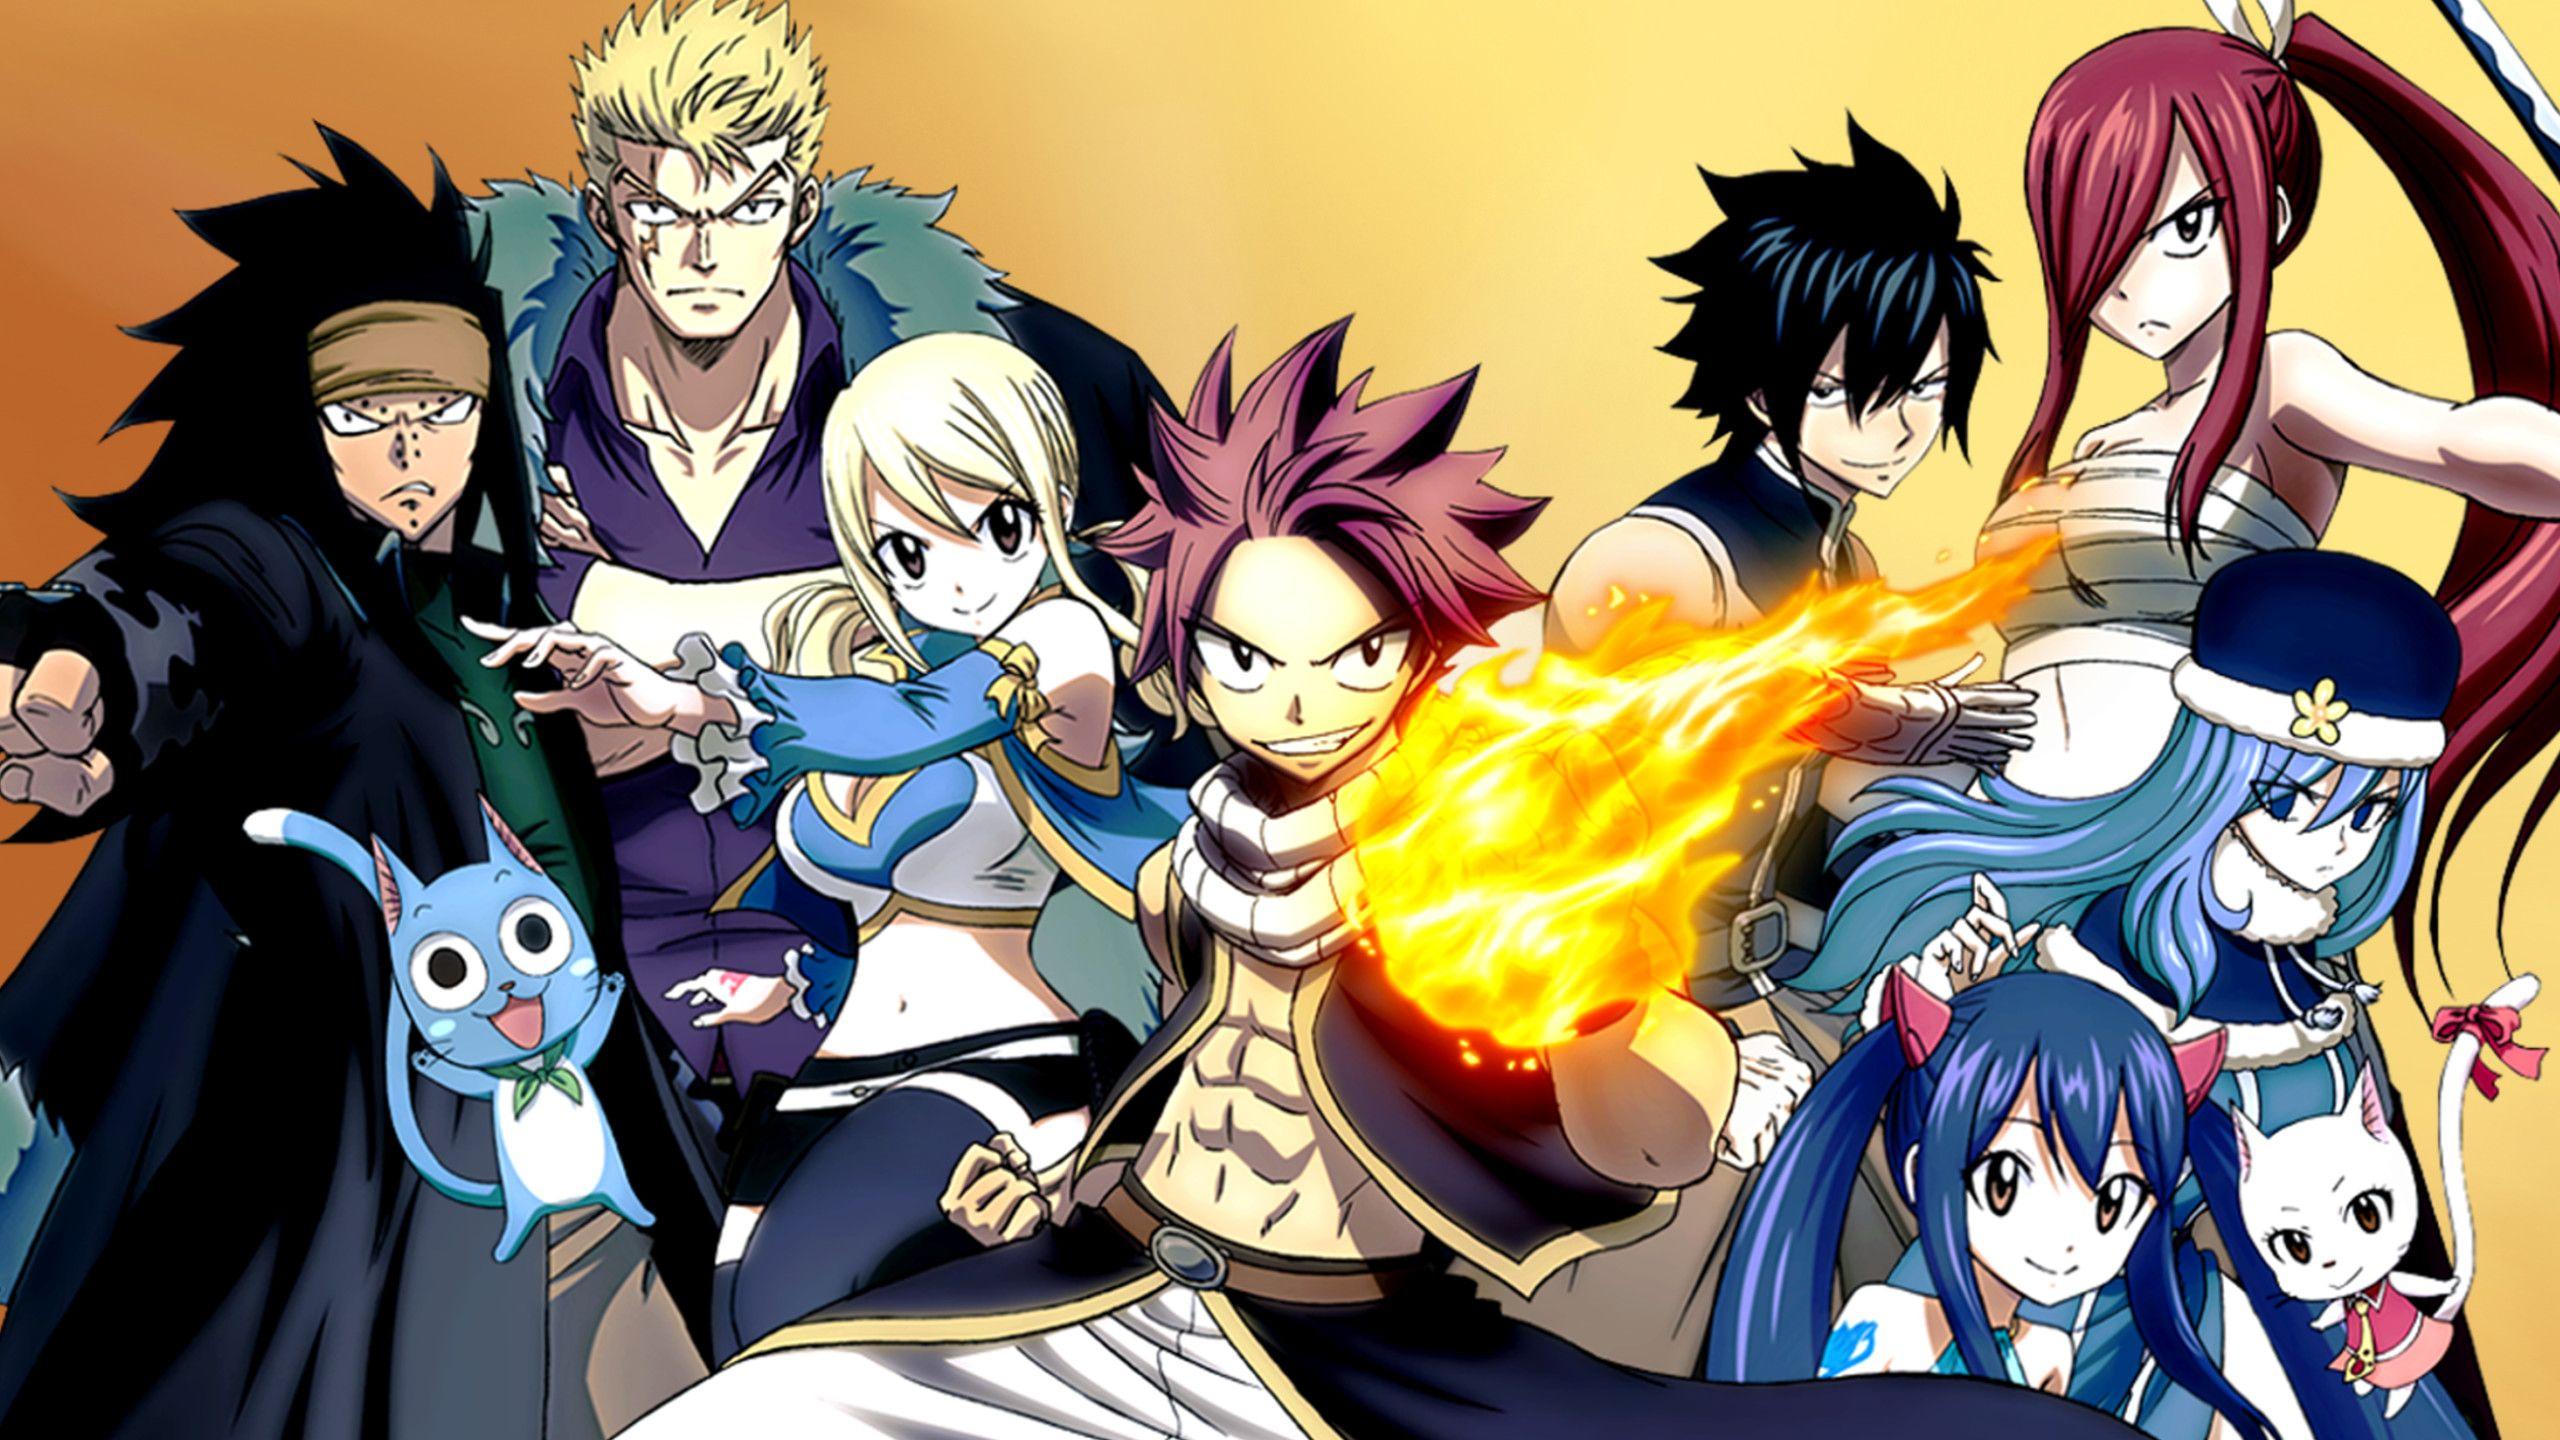 Fairy Tail Anime Wallpapers - Top Free Fairy Tail Anime Backgrounds